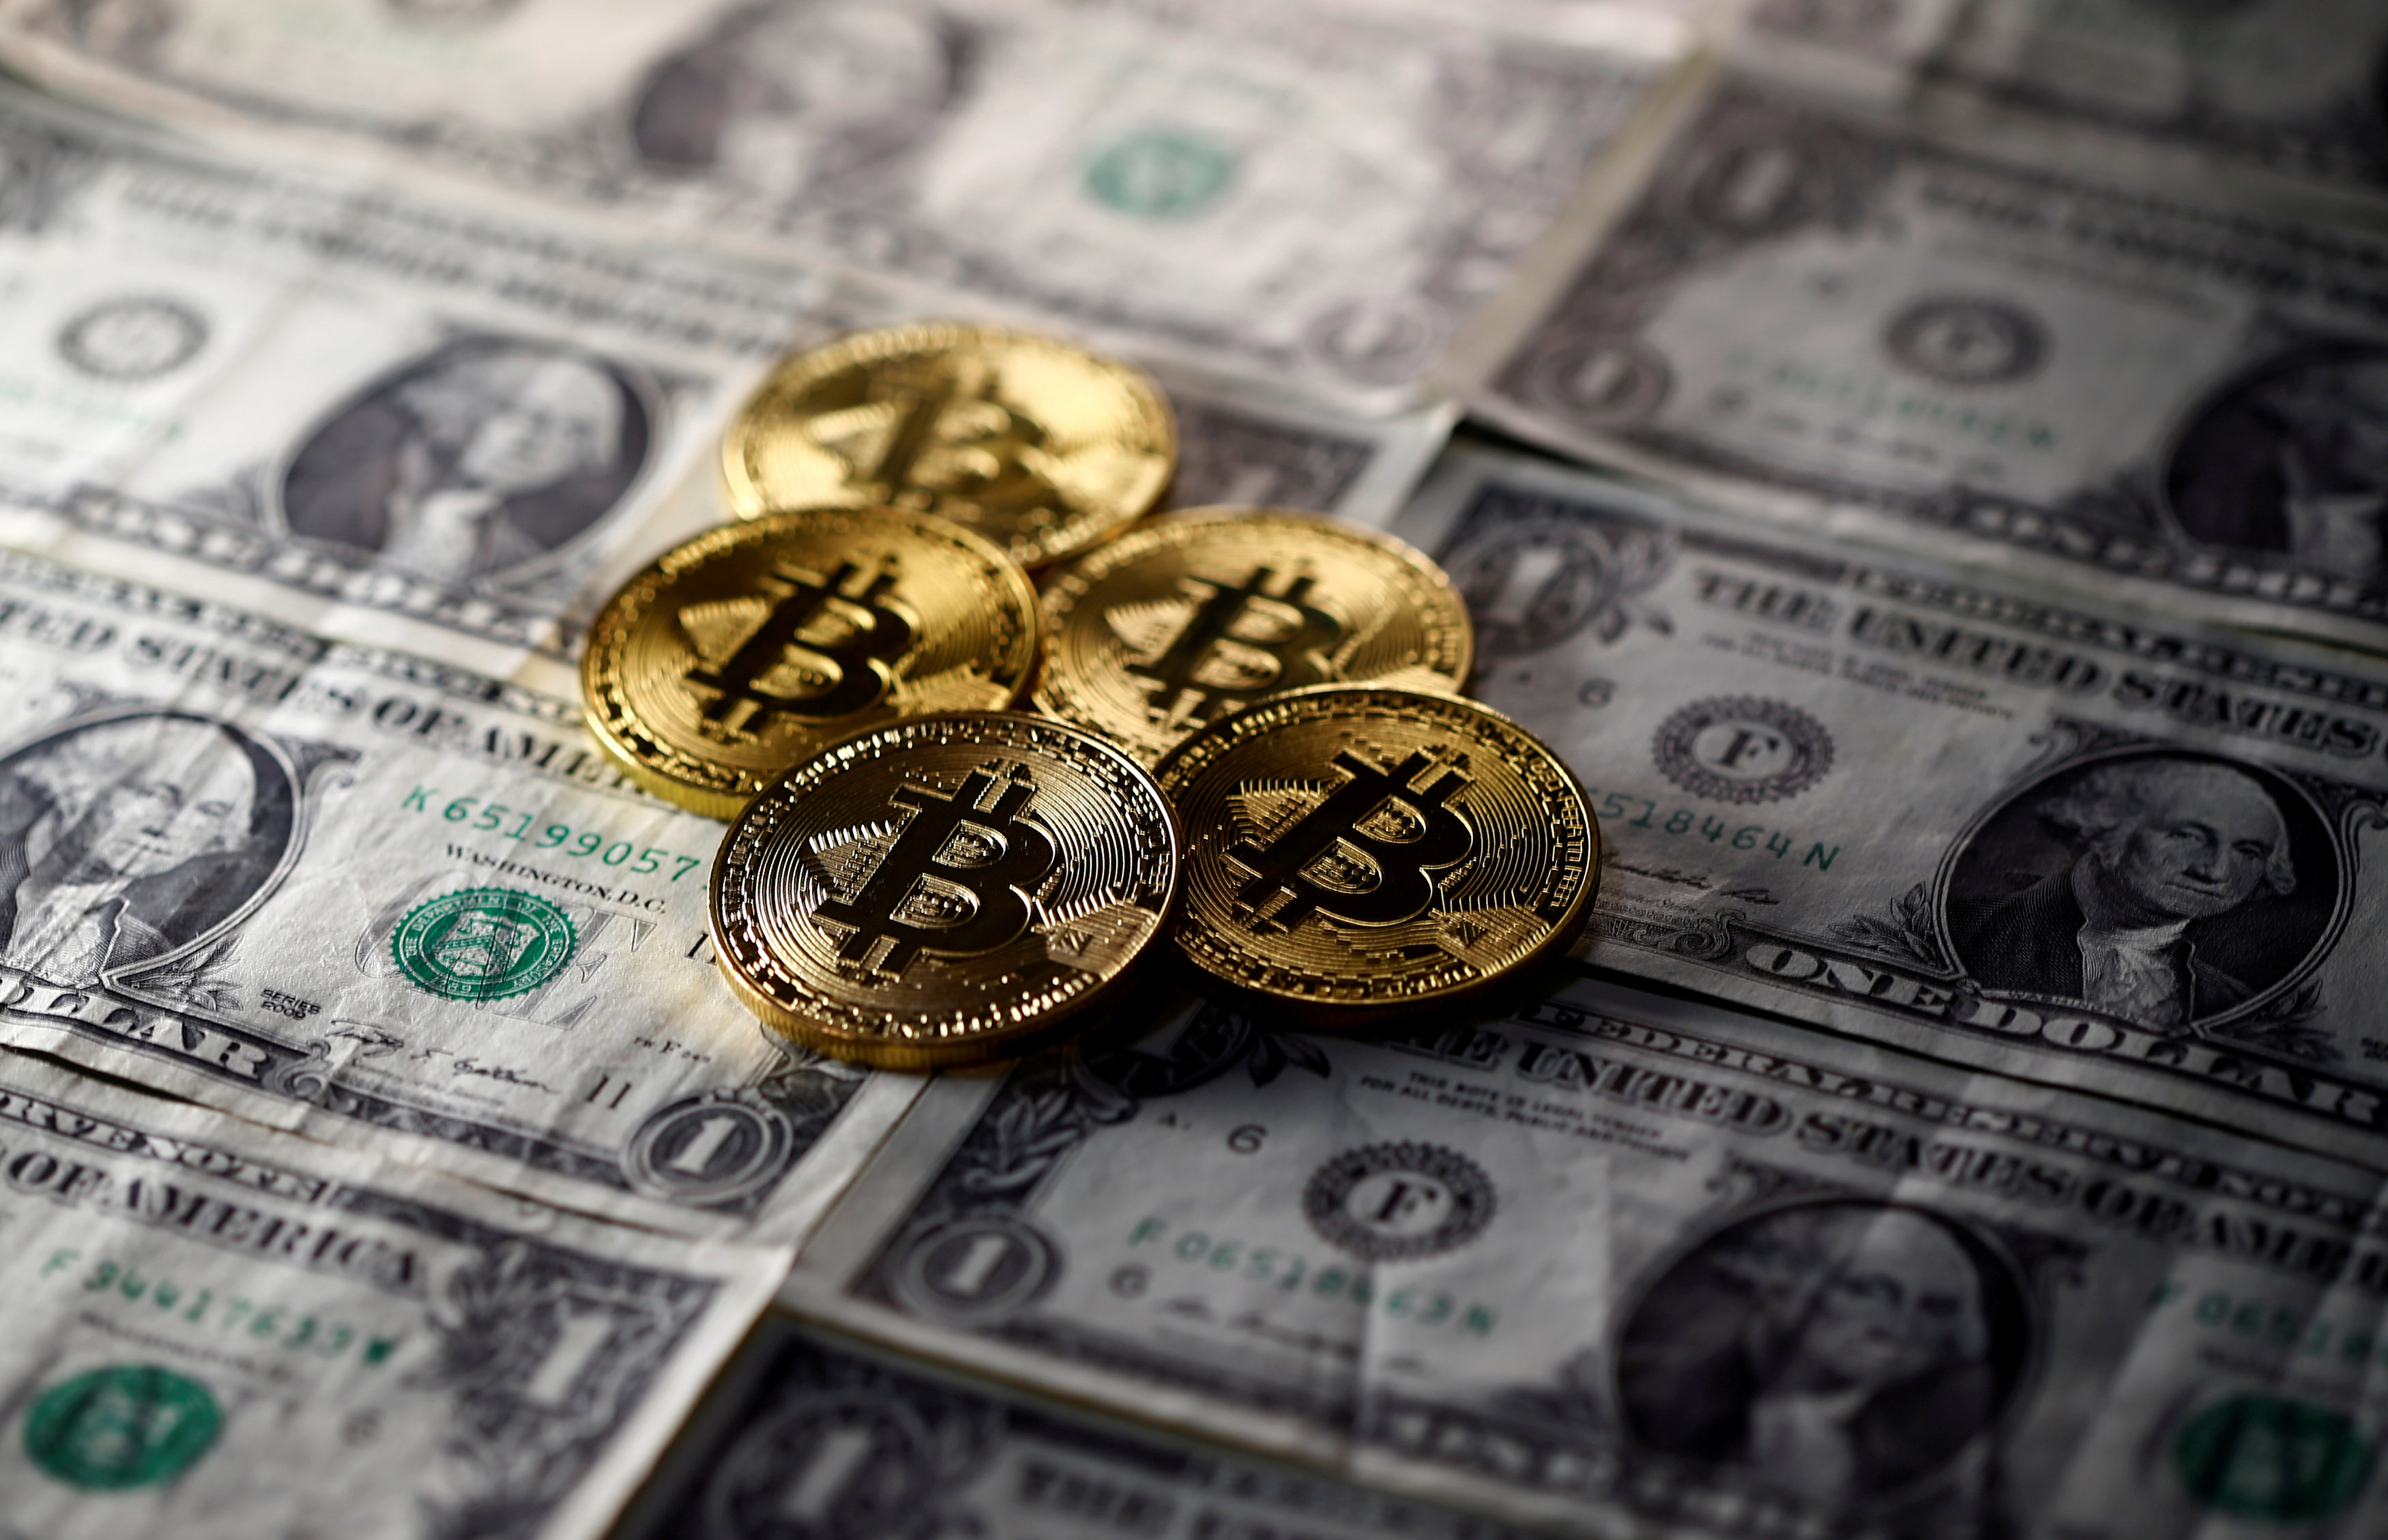 Japanese firm reports $530m cryptocurrency heist